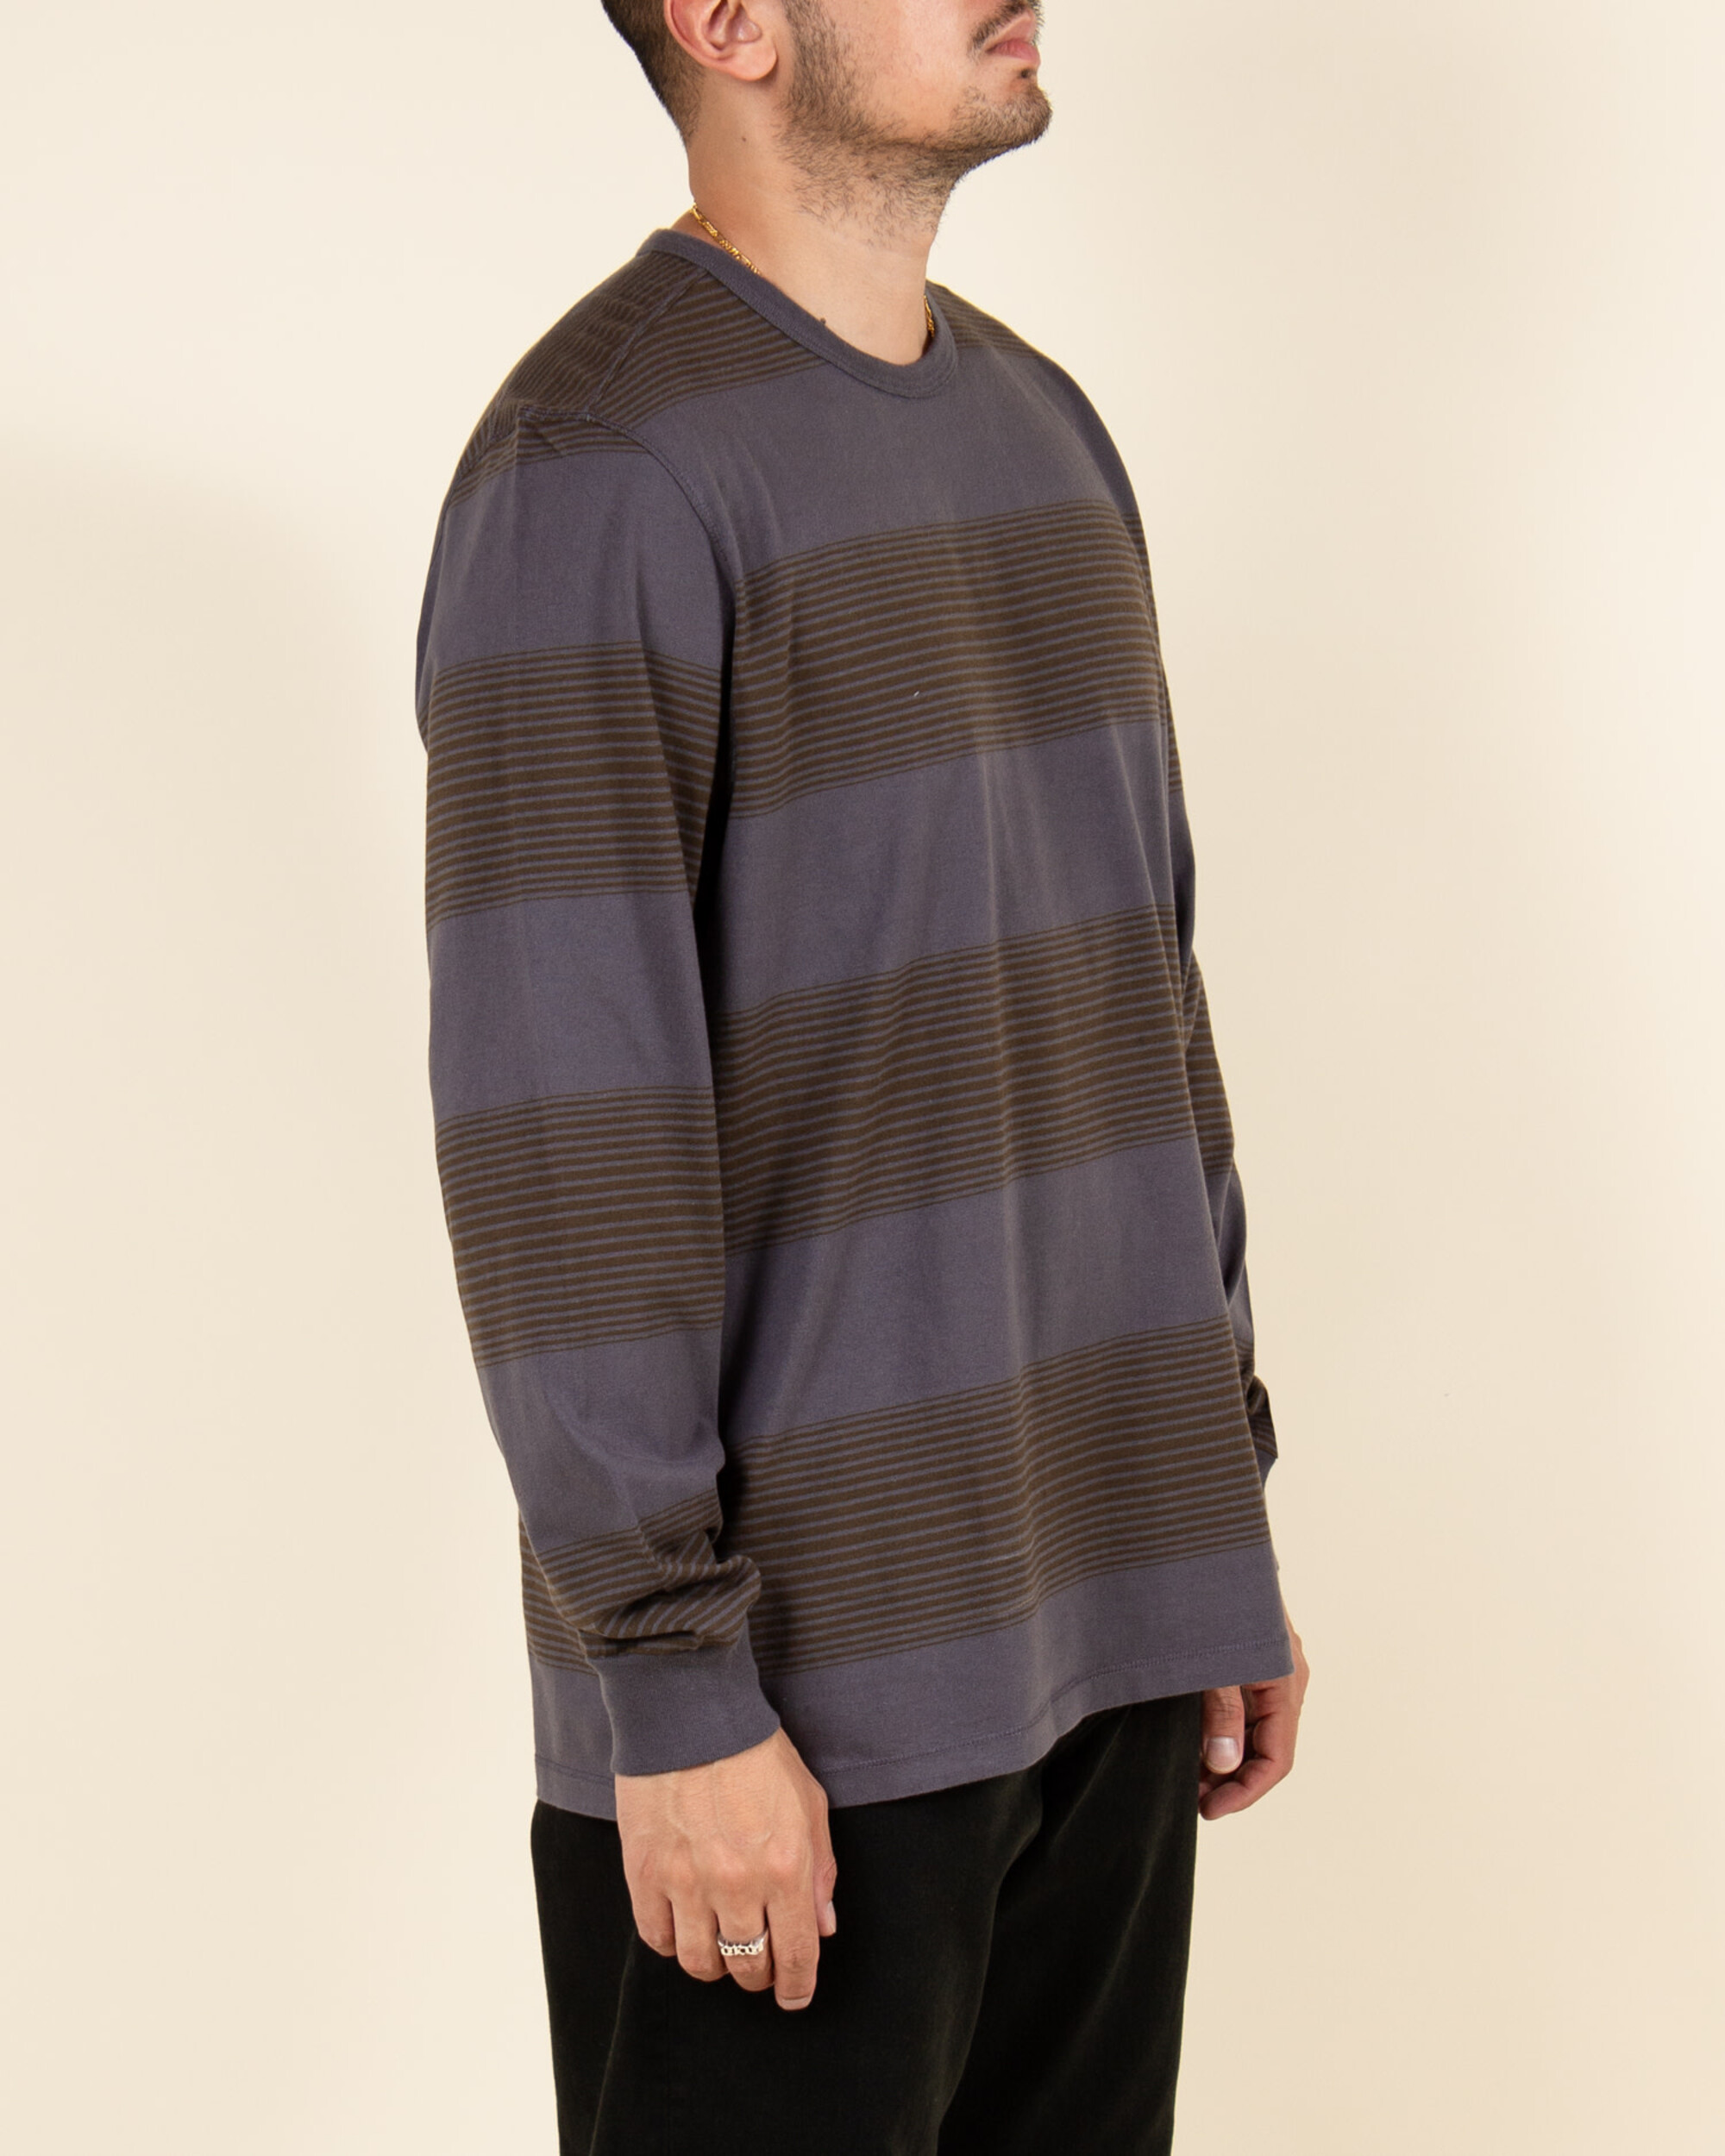 Pop Trading Co Striped Logo Longsleeve T-shirt - Charcoal/Delicioso